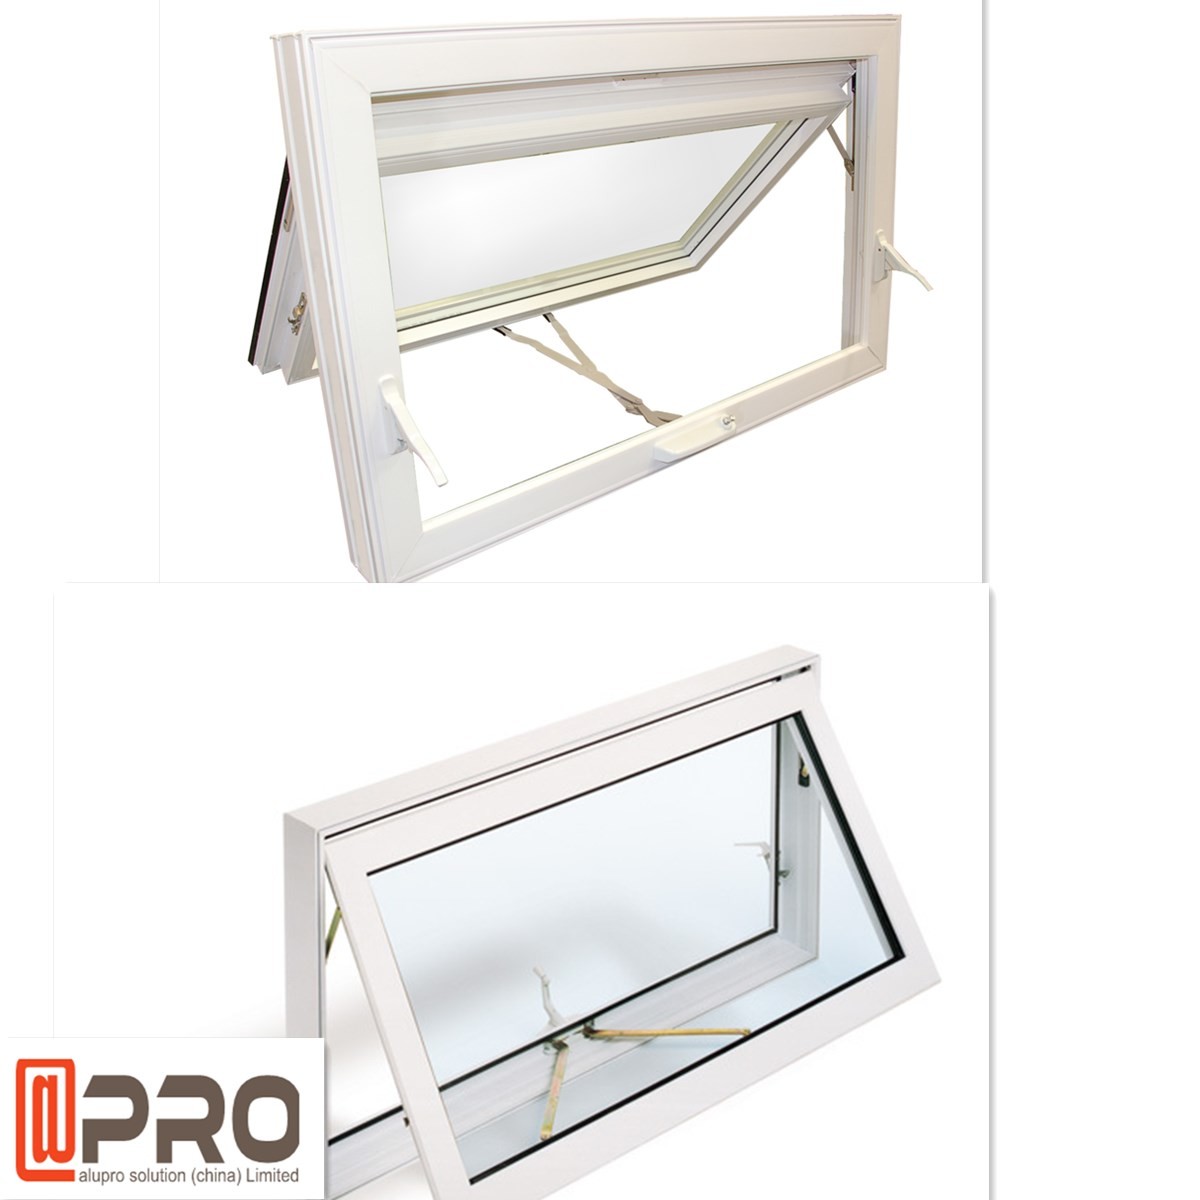 door and window awnings,aluminum window awnings for home,awing window,top hung windows